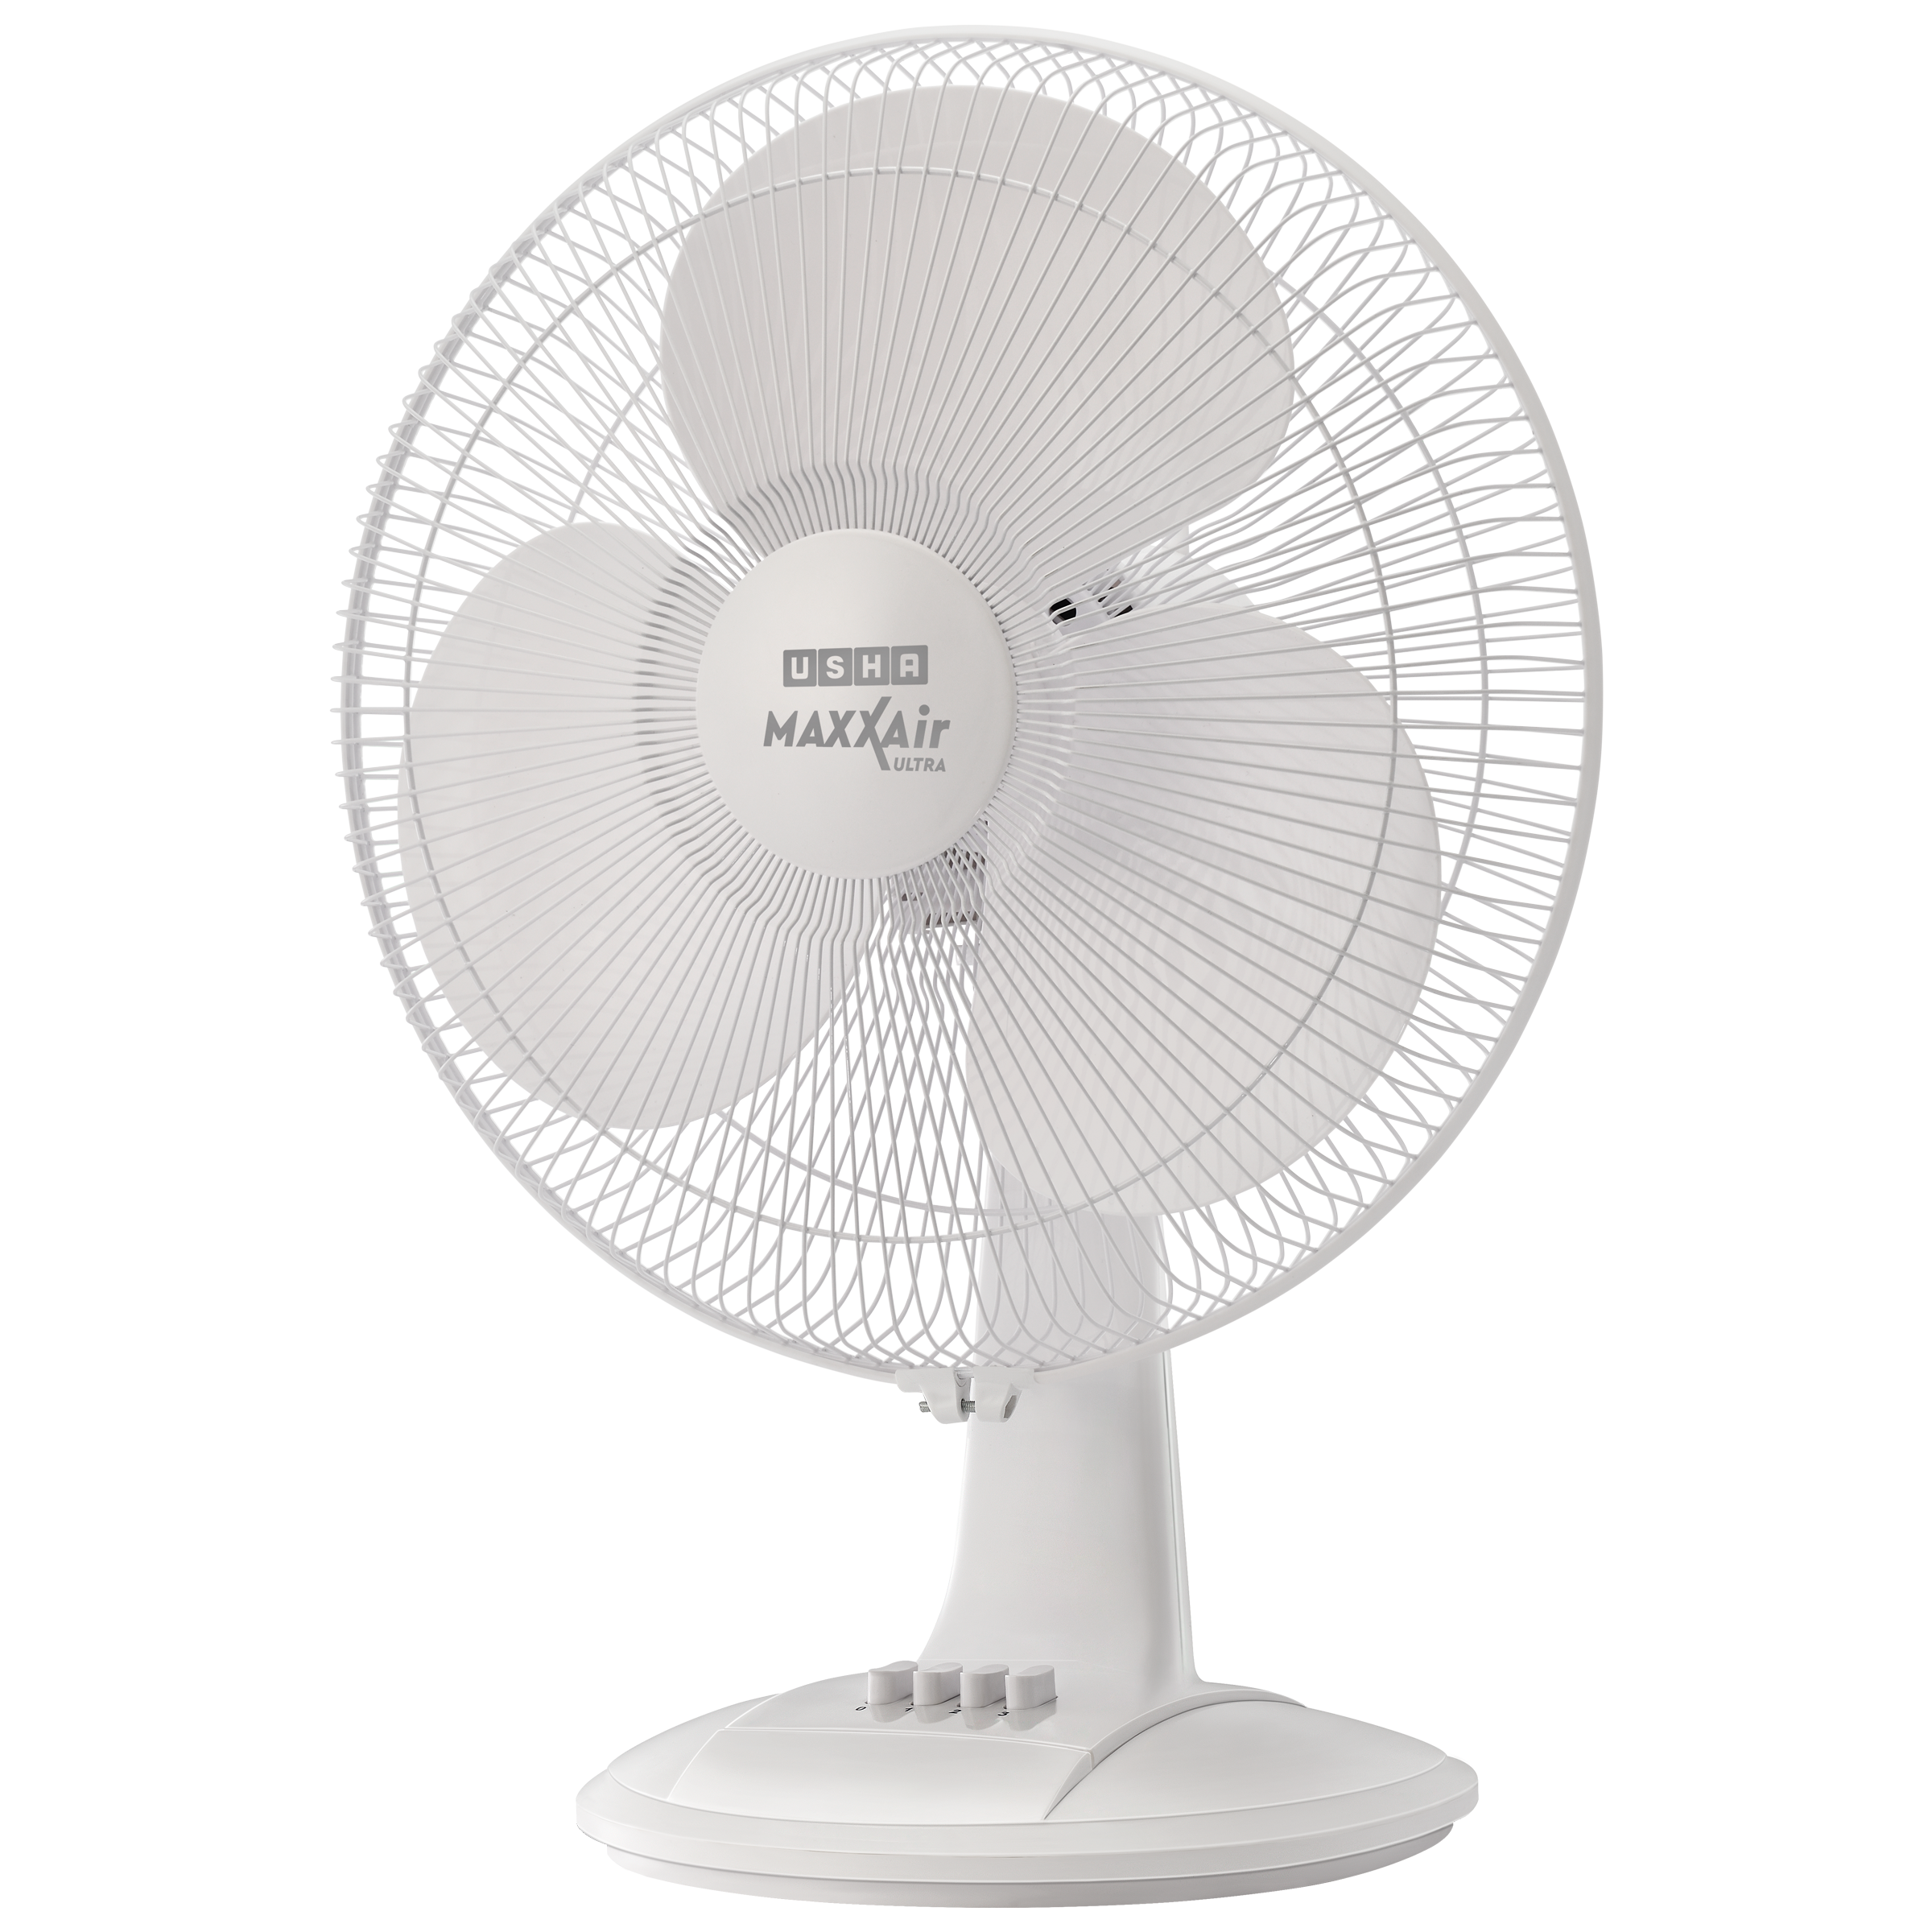 USHA Maxx Air Ultra 400mm 3 Blade Thermal Overload Protector Table Fan (Jerk Free Oscillation, White)